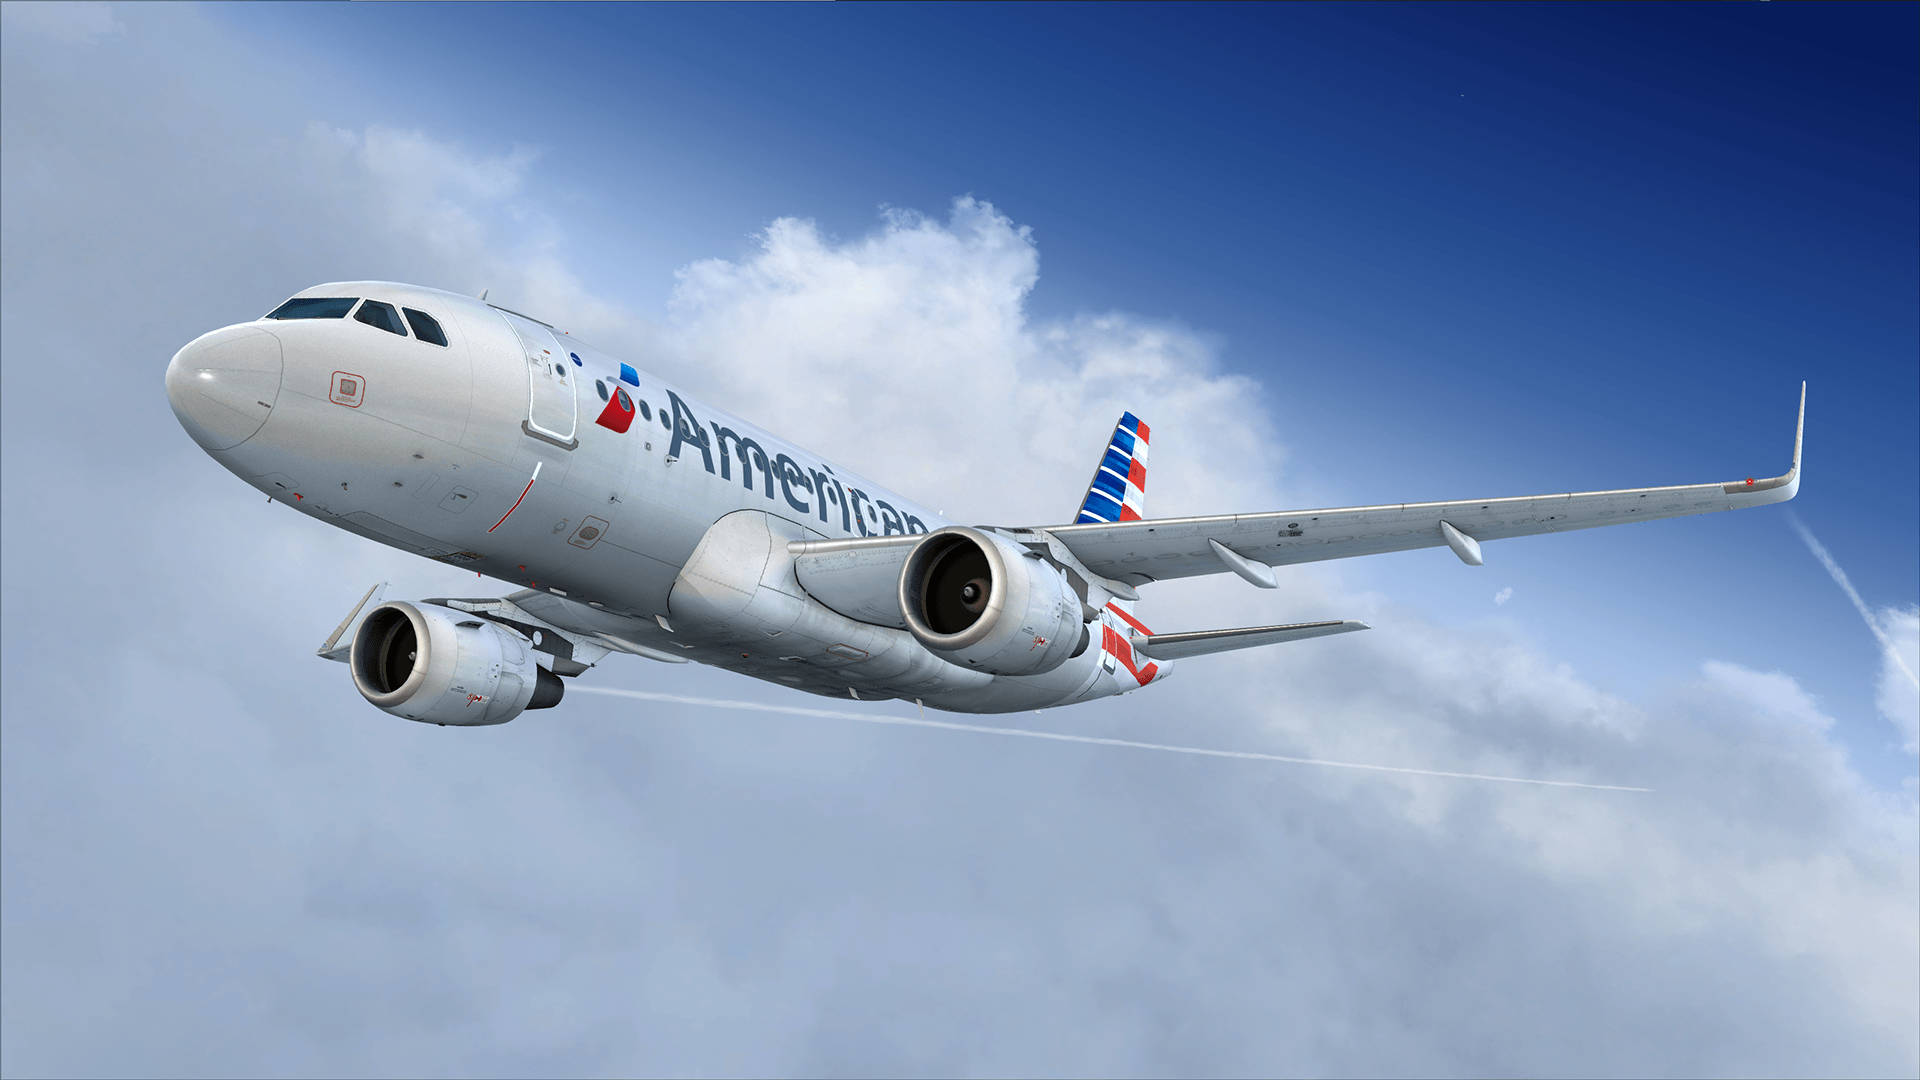 American Airlines Aircraft In Sky Wallpaper